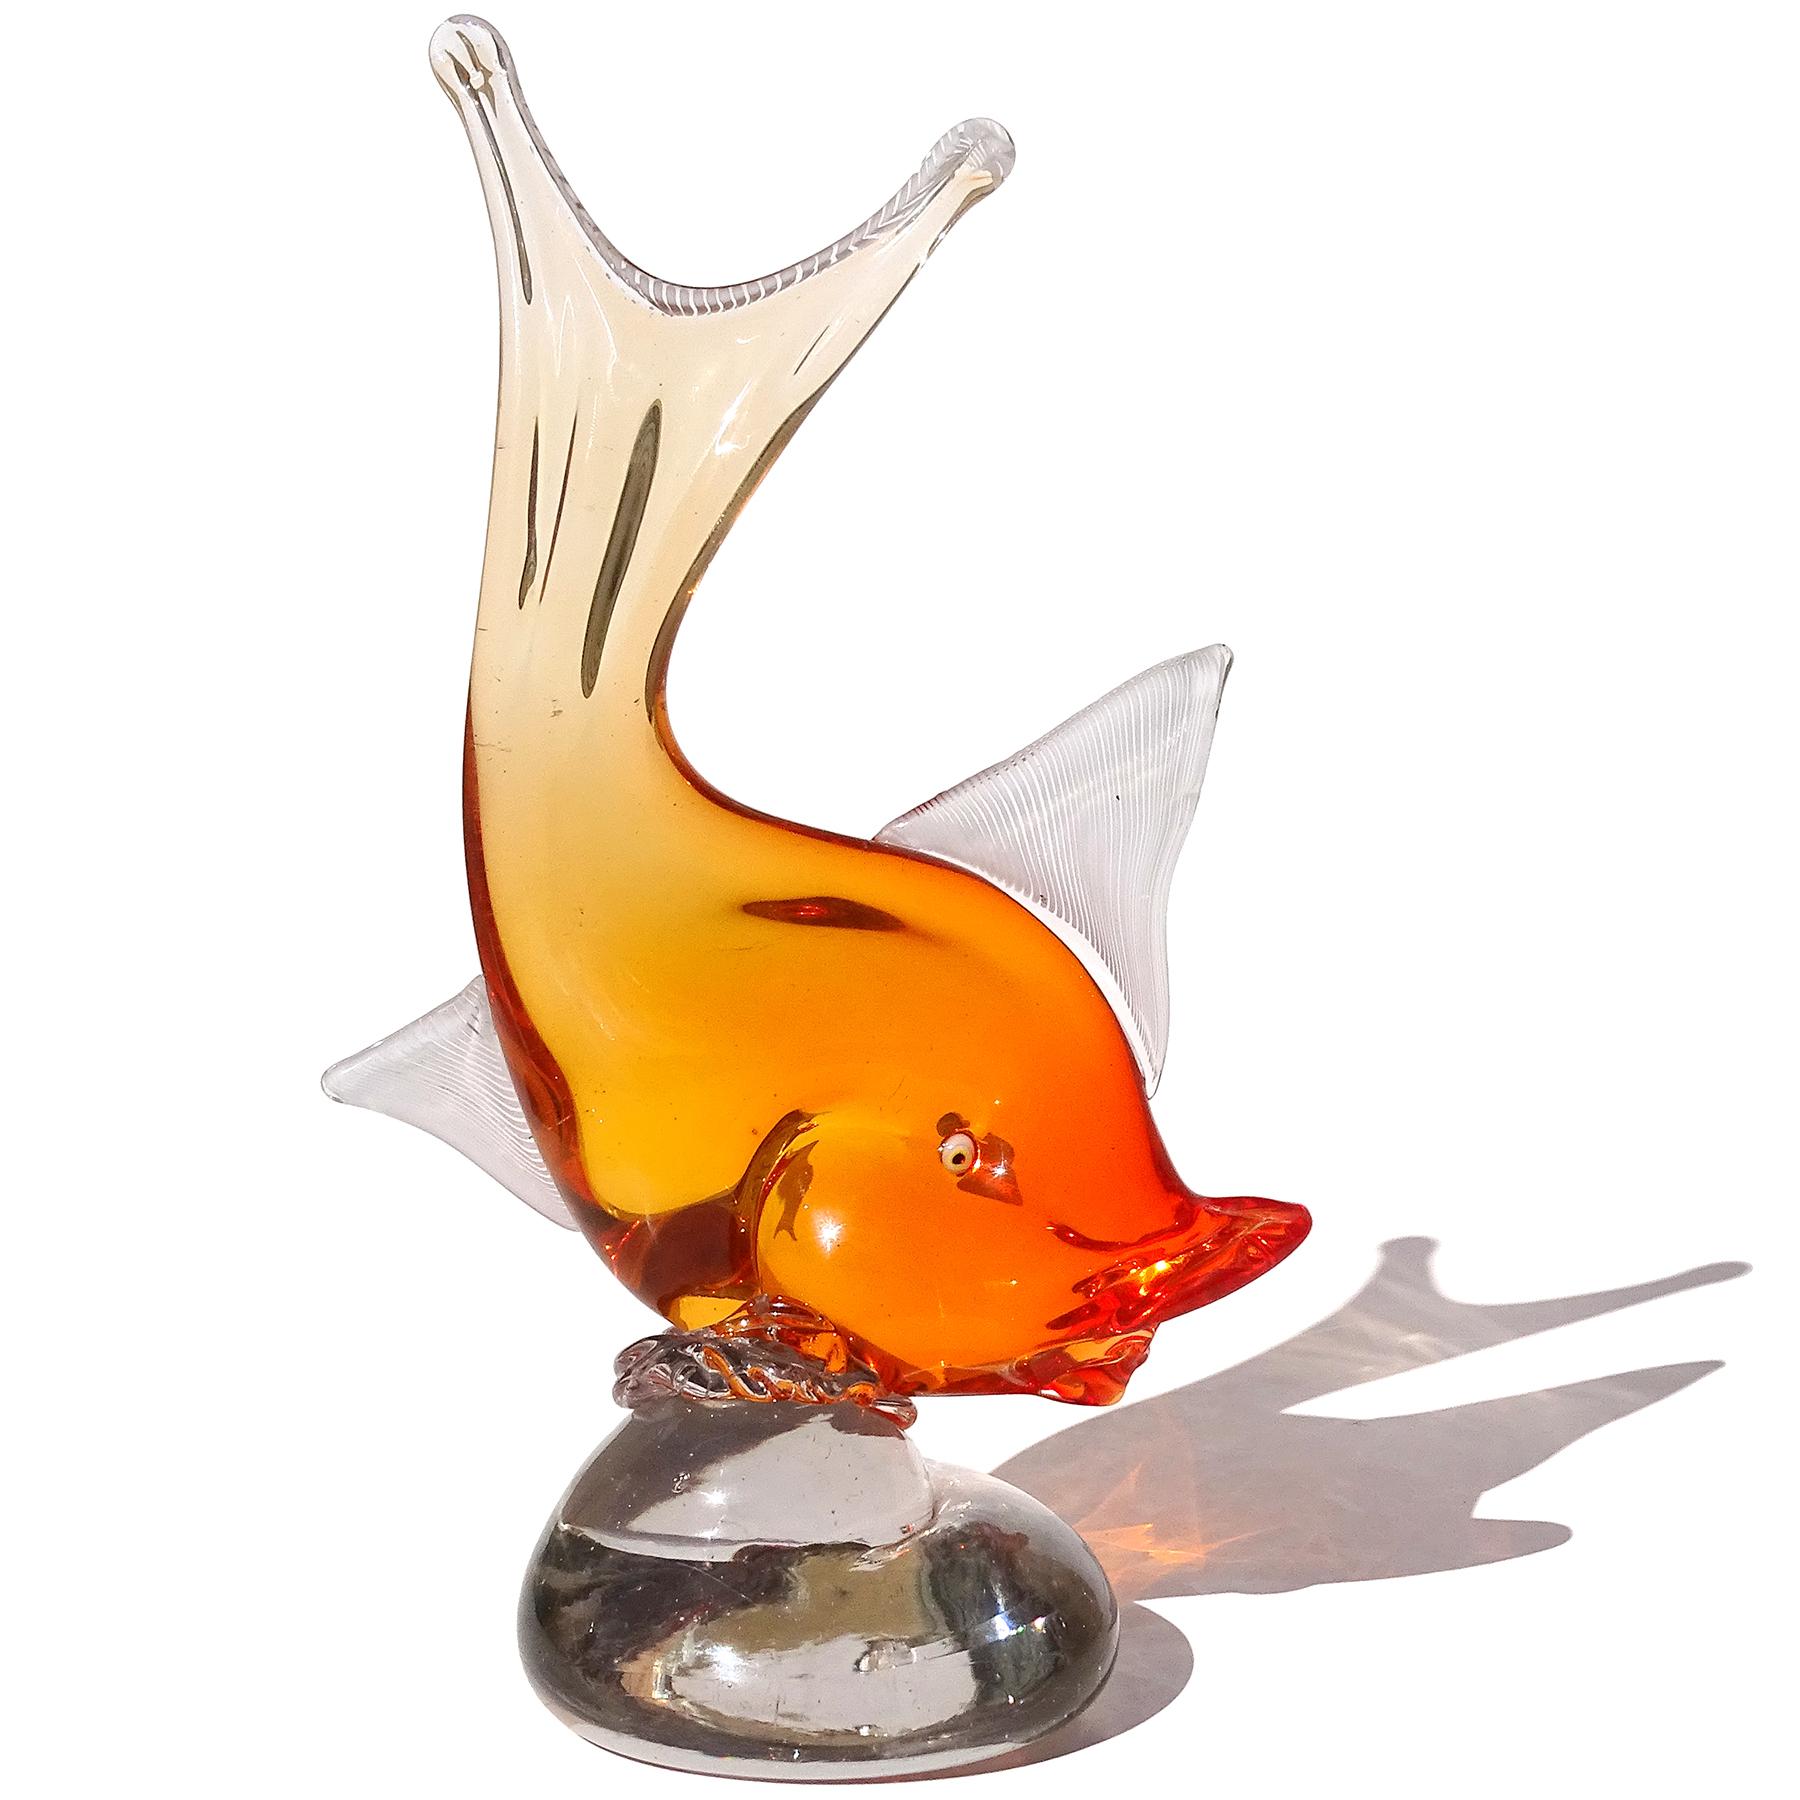 Beautiful vintage Murano hand blown Sommerso bright orange Italian art glass fish on base sculpture. Documented to designer Dino Martens for Aureliano Toso, circa 1950s. Published in his book (see photo), model 6180, and a later model number 6913 is